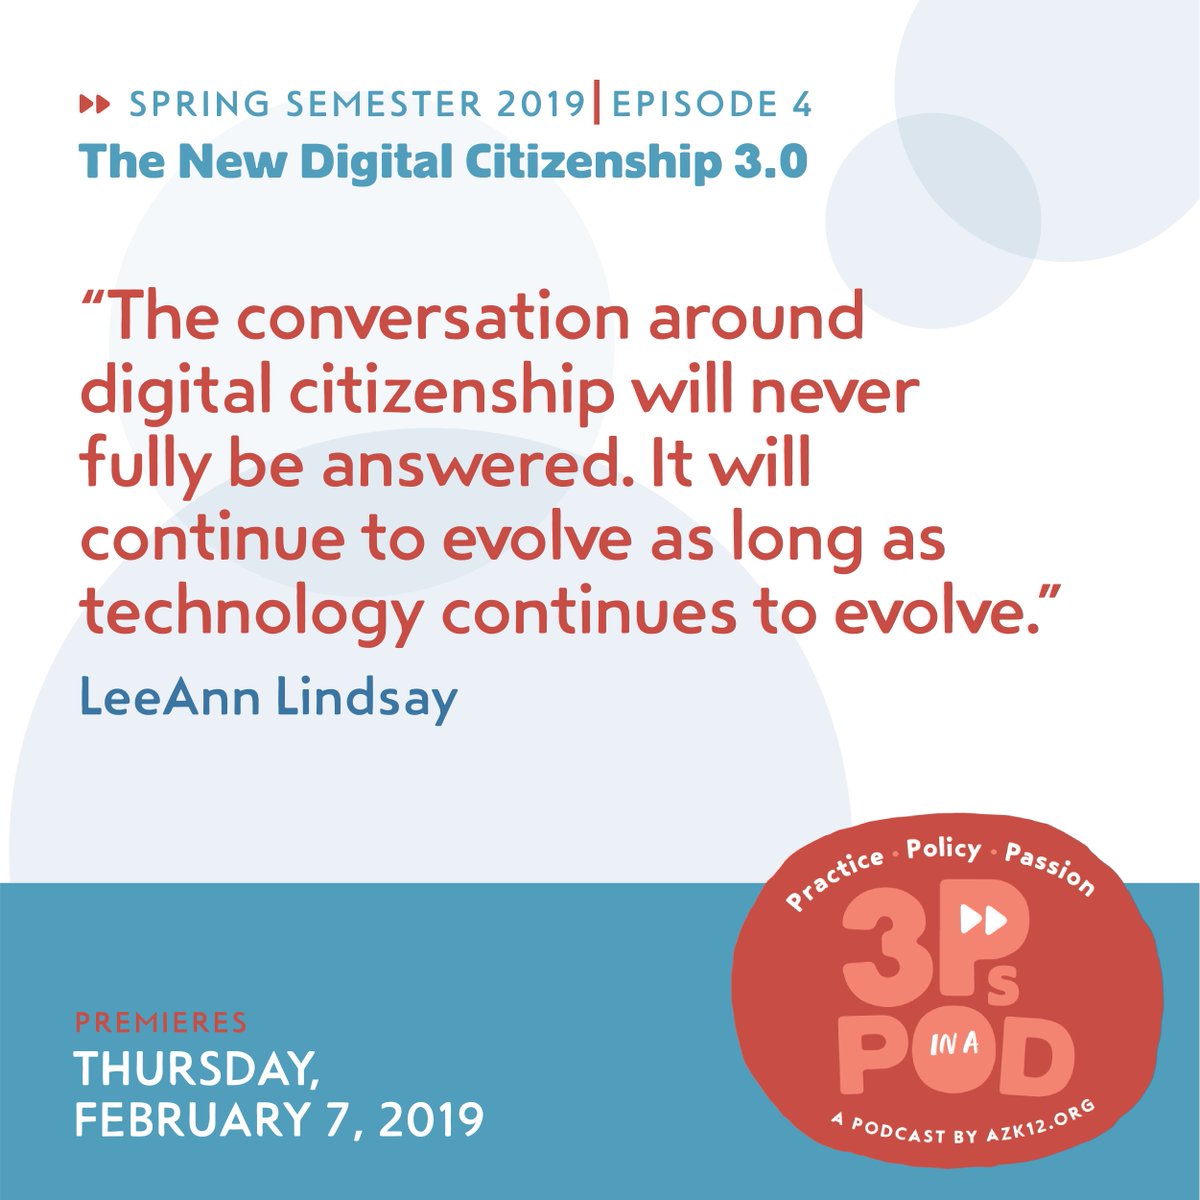 Learn the history of digital citizenship and where it is headed in relationship to student learning and access in this week's episode with LeeAnn Lindsey: bit.ly/3psinapod
#3PsinaPod